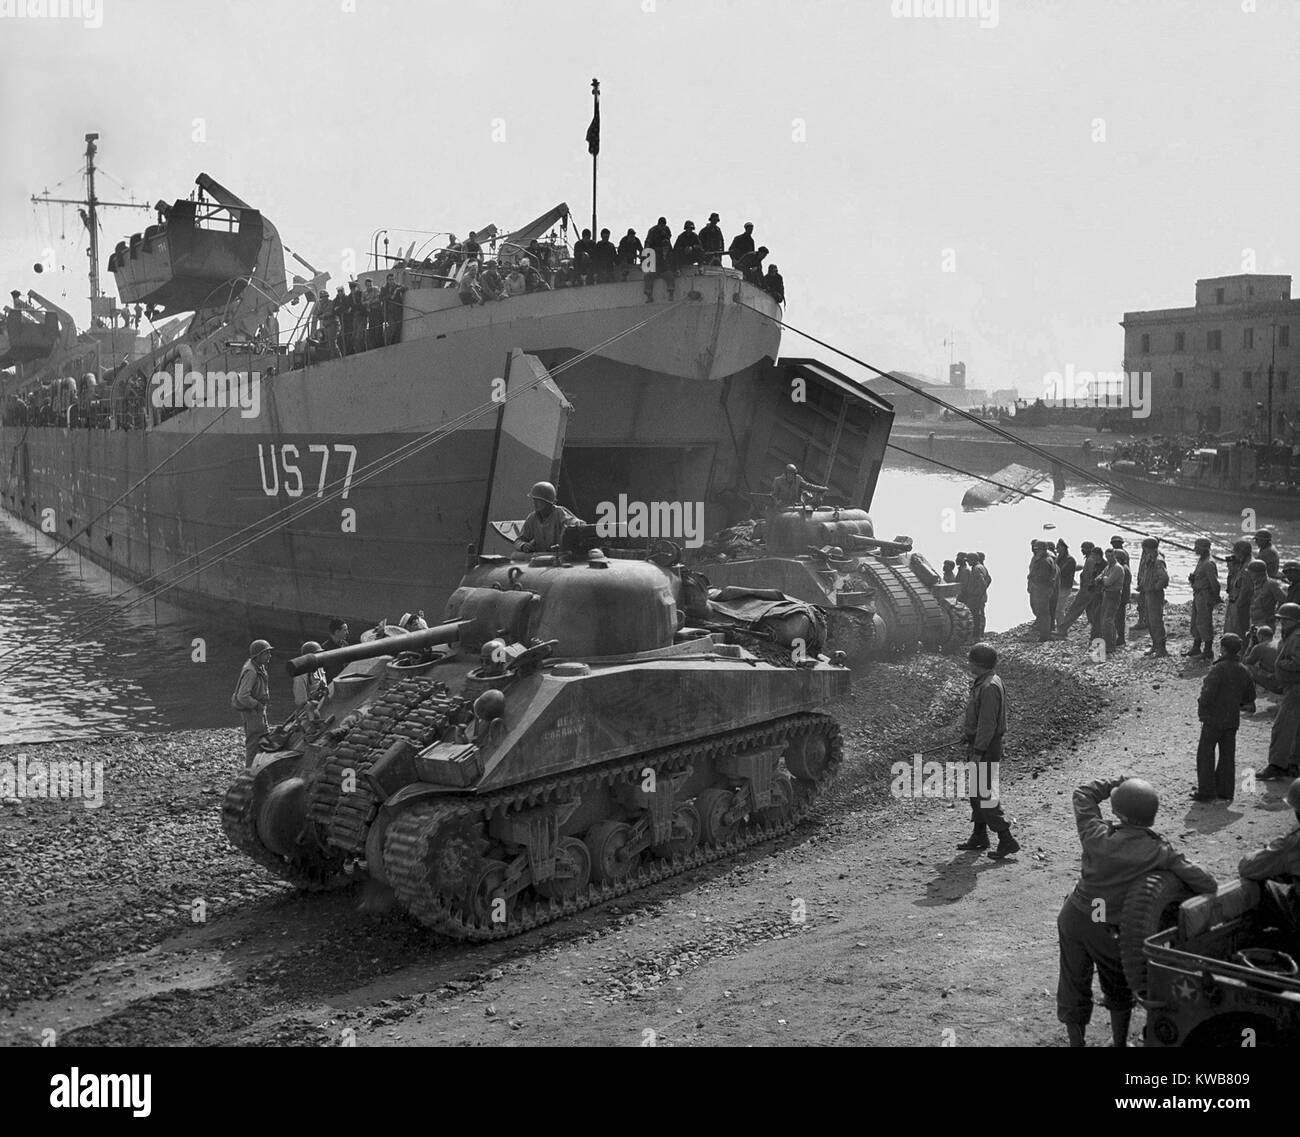 U.S. Sherman tanks leave a landing ship in Anzio harbor, May 1944. While costly combat continued, U.S. Forces built up on the Anzio Beach head for the advance on Rome and push North. World War 2. (BSLOC 2014 10 32) Stock Photo